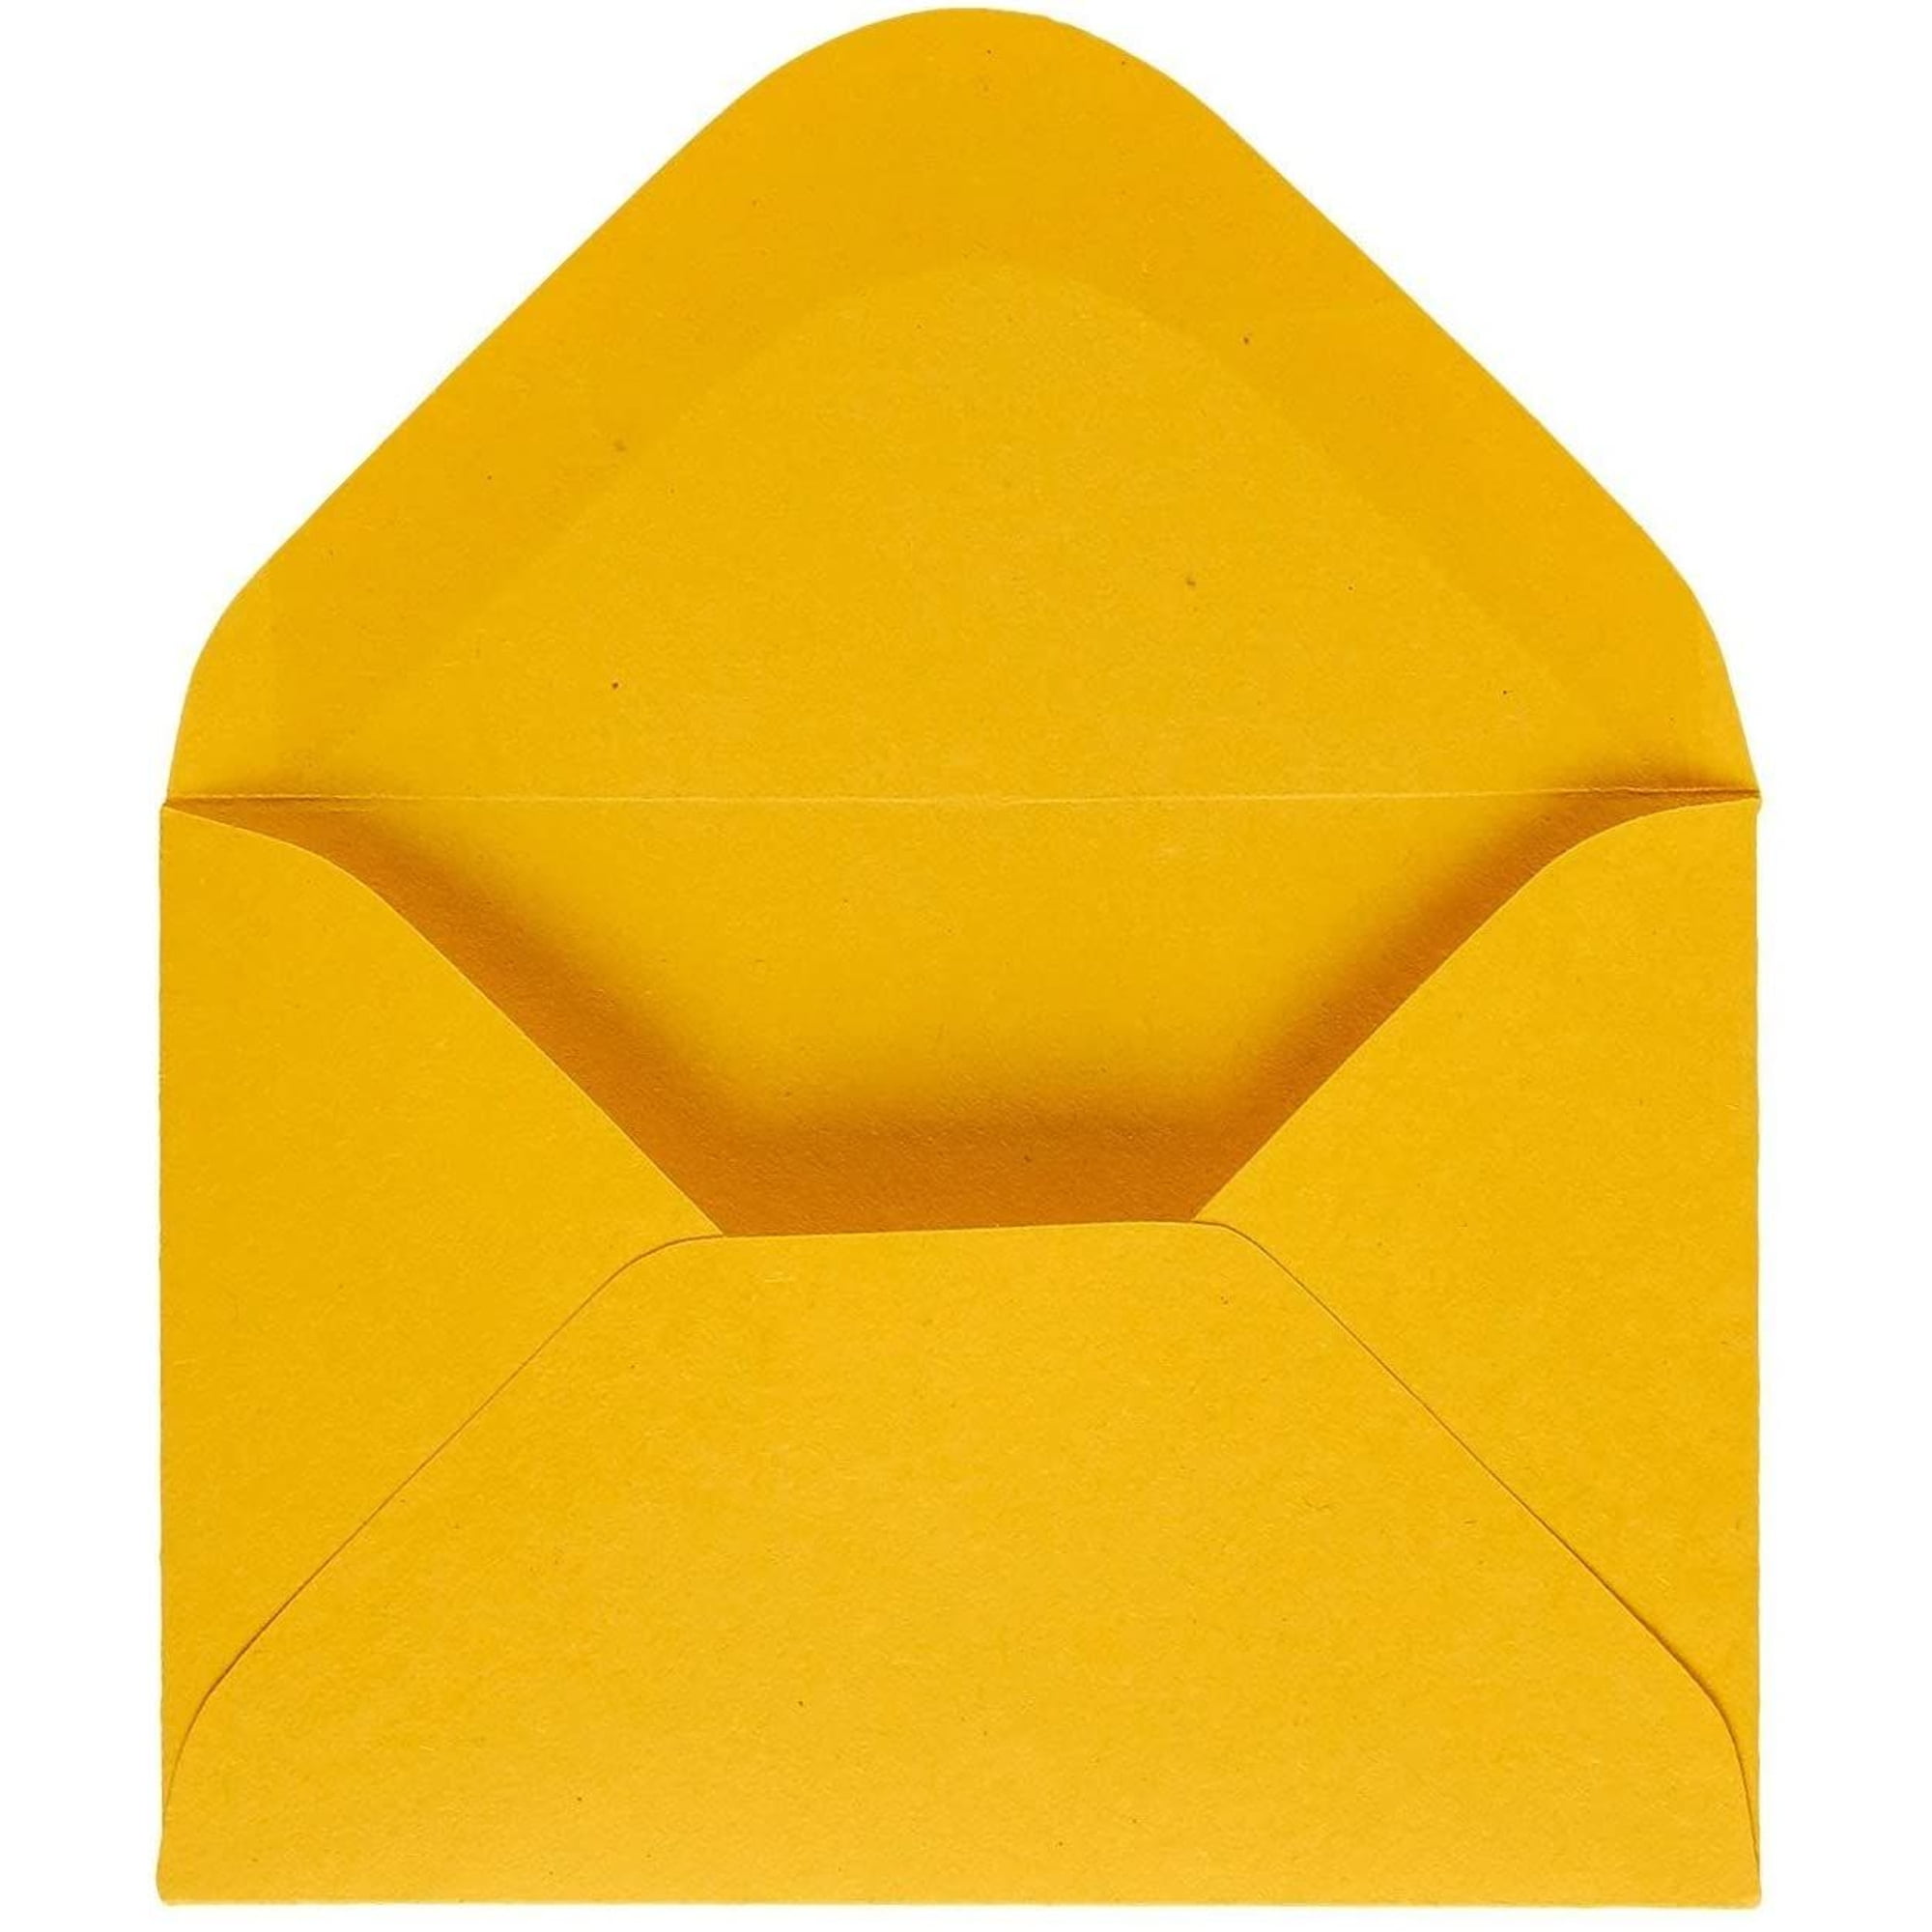  Heavy Duty Mini Envelopes with Gold Border - 48 PK - Christmas  Gift Card Envelopes Small Envelope for Note Cards Business Card Wedding Red  Envelopes 3.9 x 2.75 Inches : Office Products